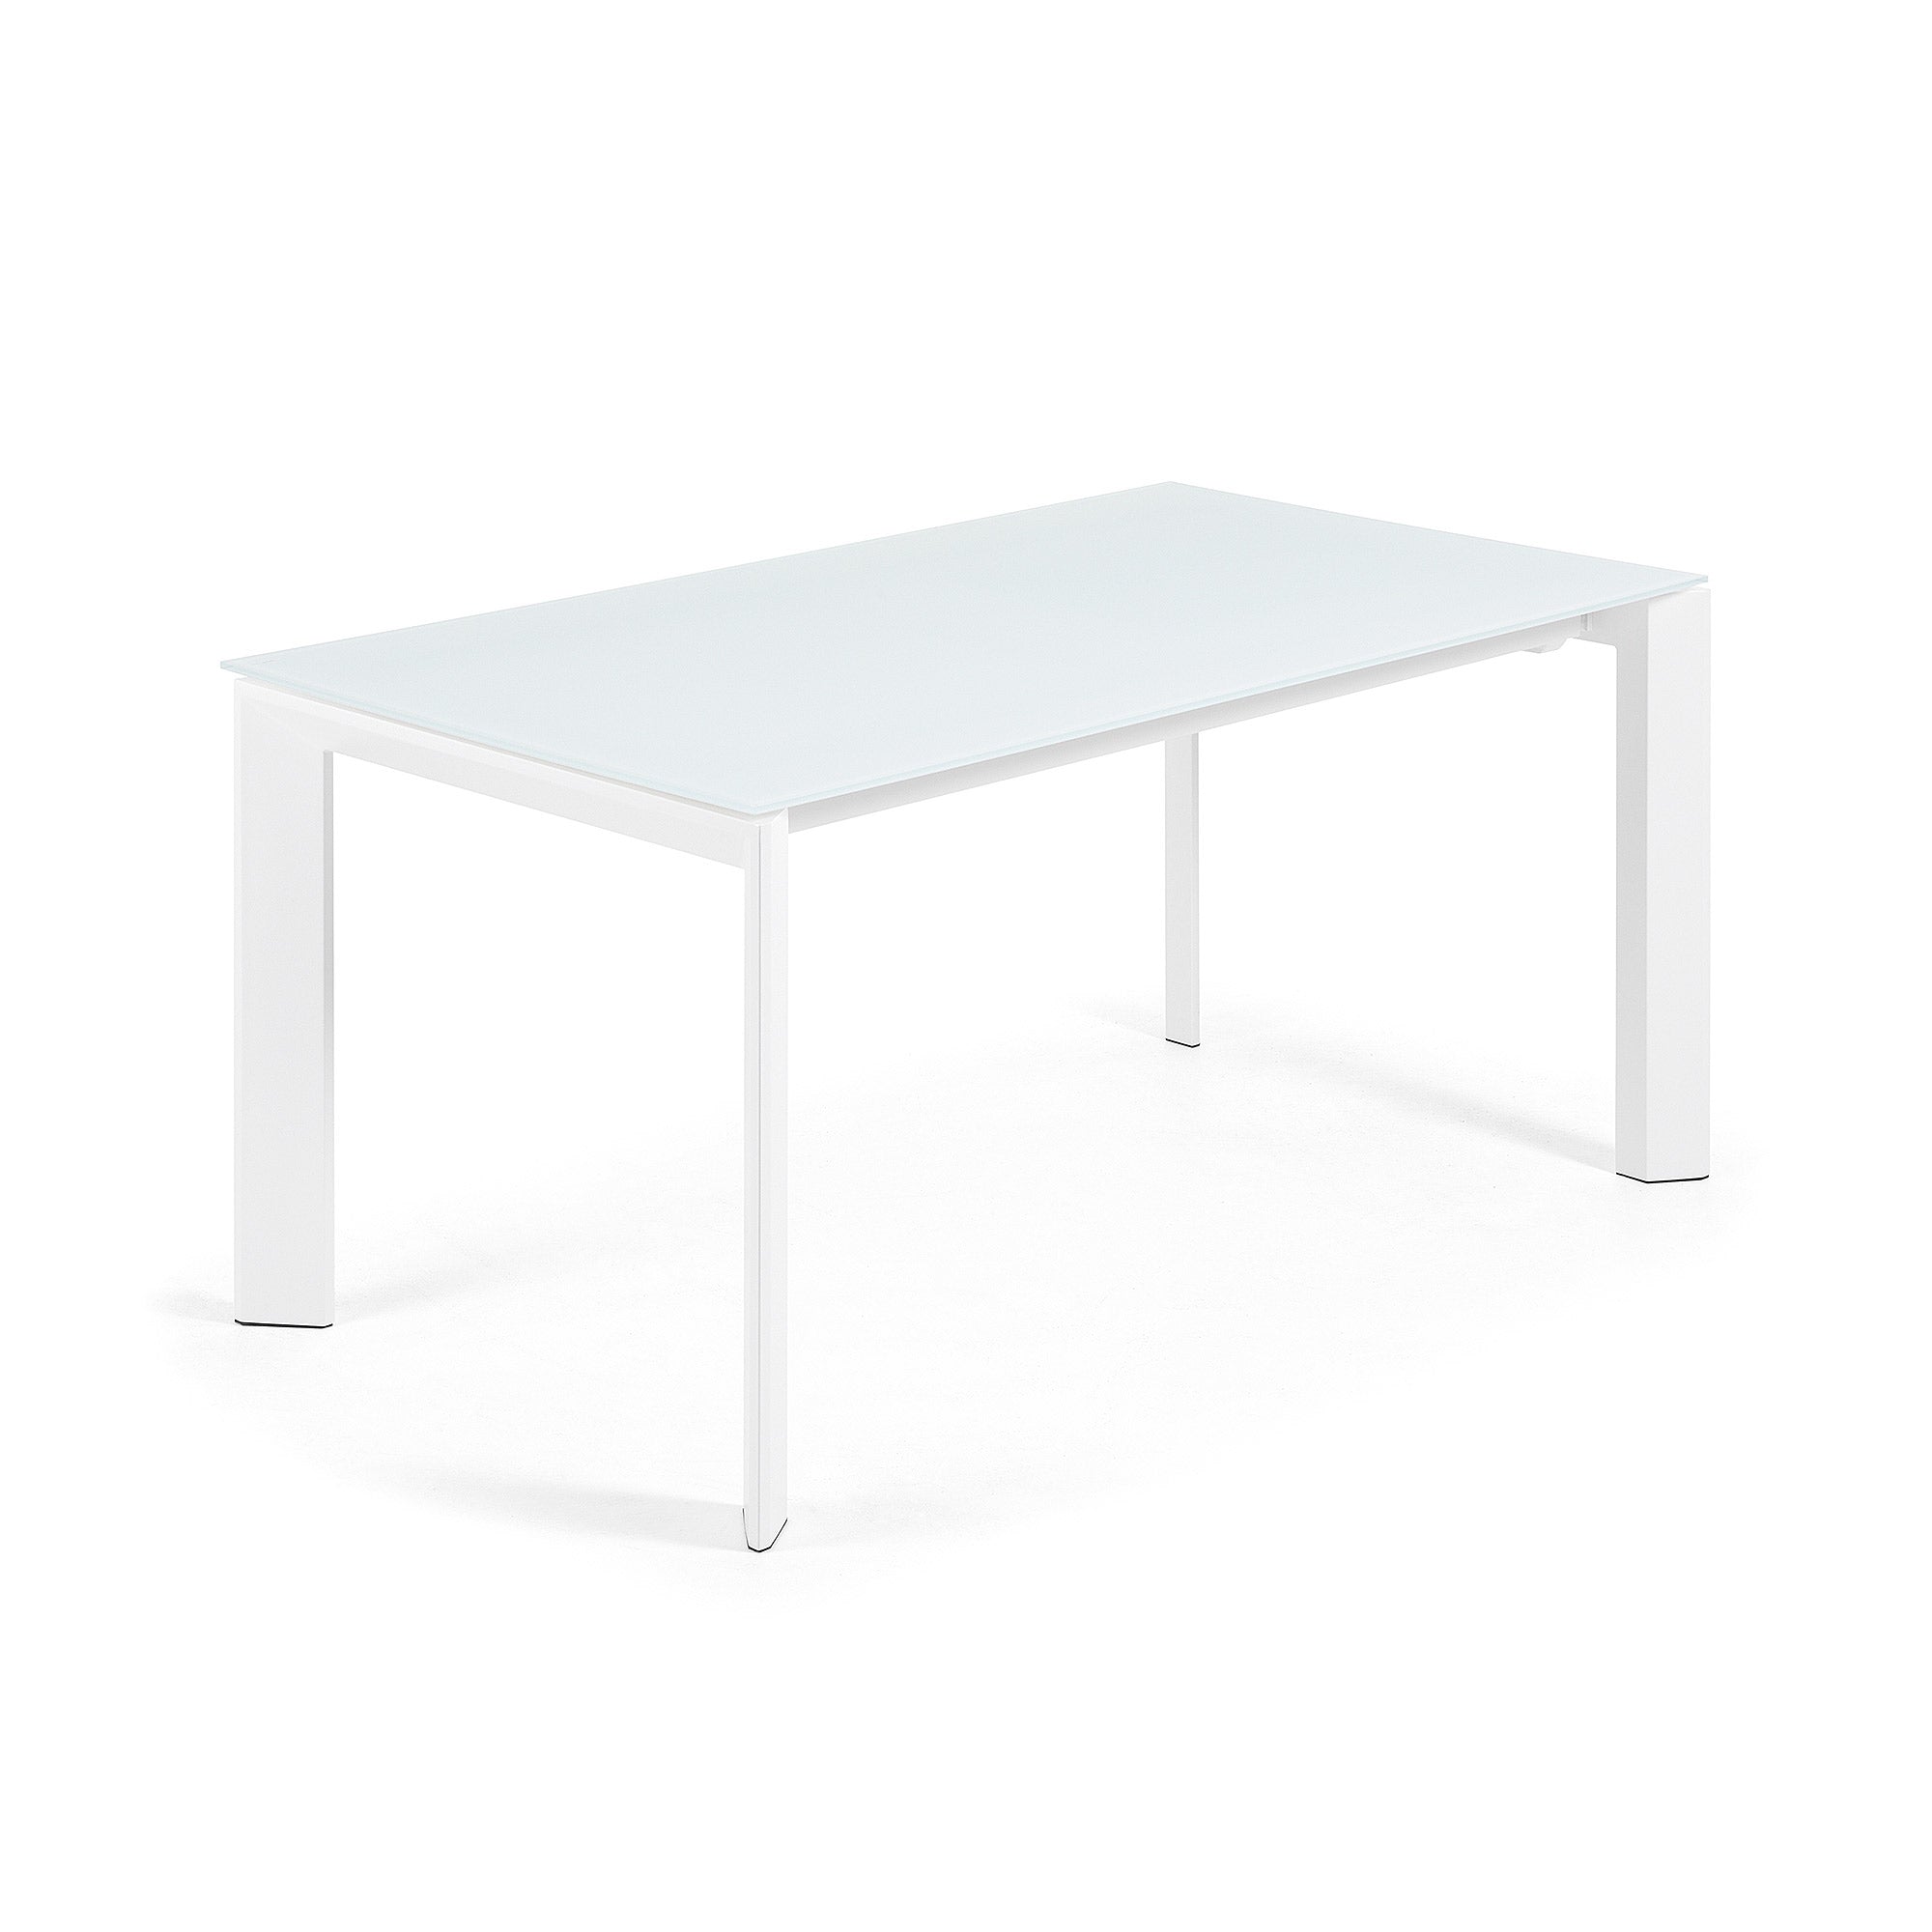 Axis white glass extendable table with white steel legs 160 (220) cm